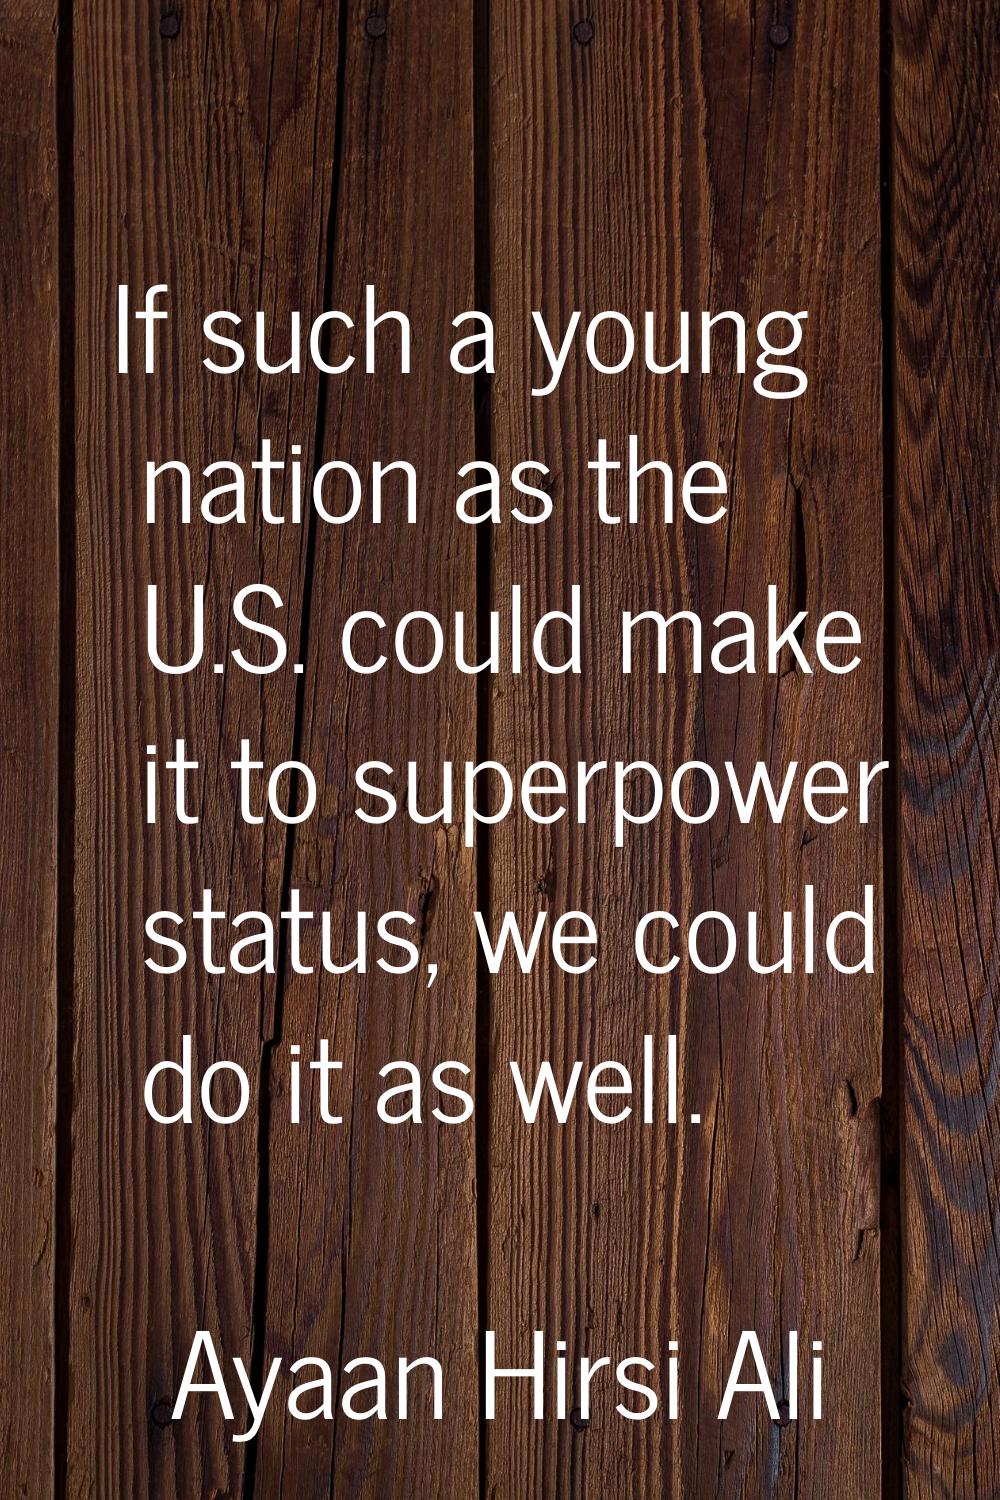 If such a young nation as the U.S. could make it to superpower status, we could do it as well.